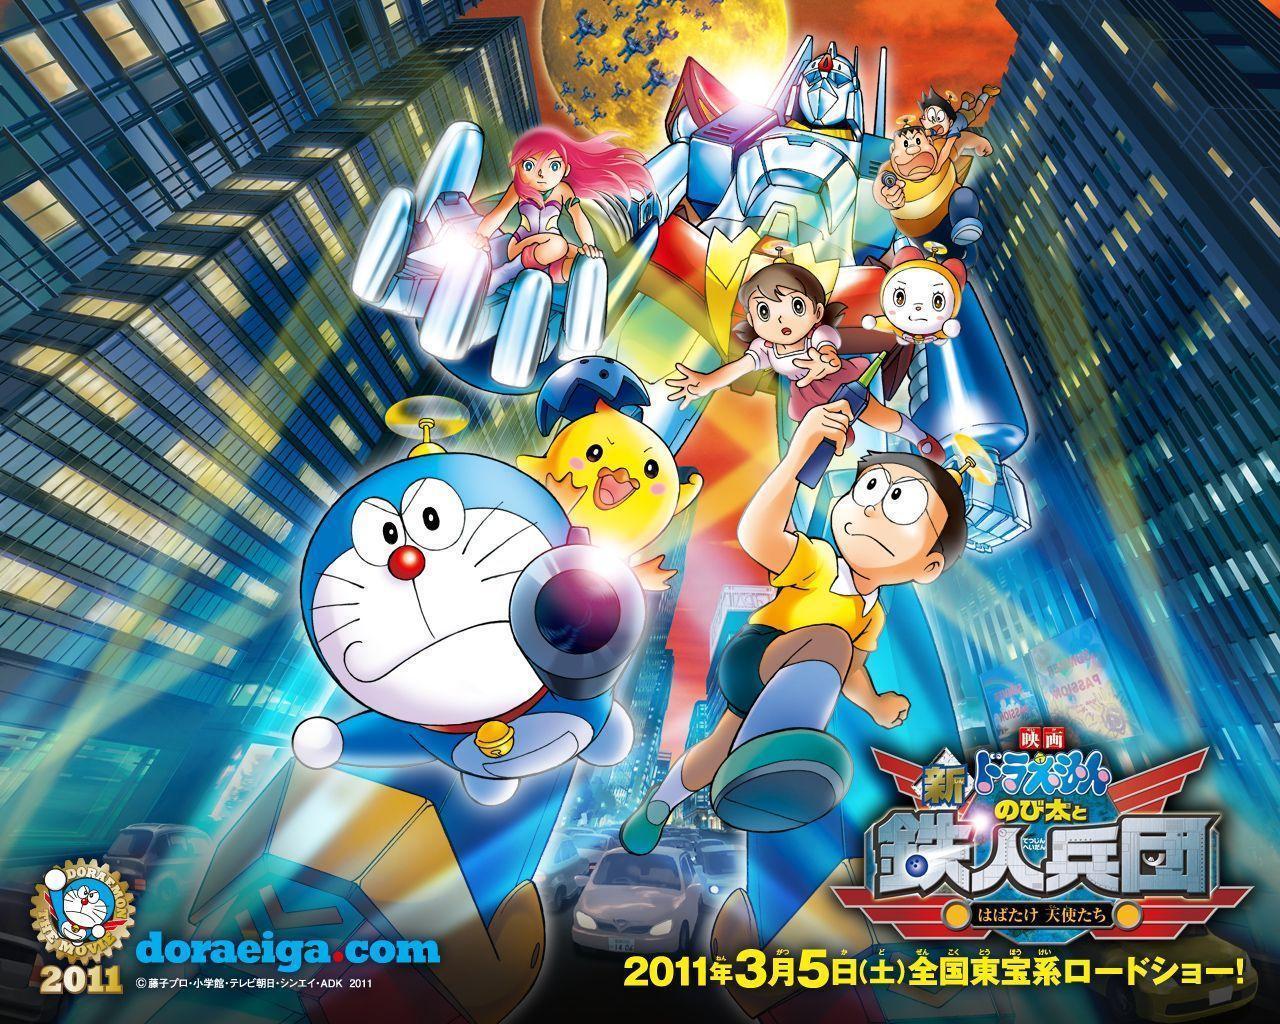 Doraemon: Nobita and the New Steel Troops Winged Angels